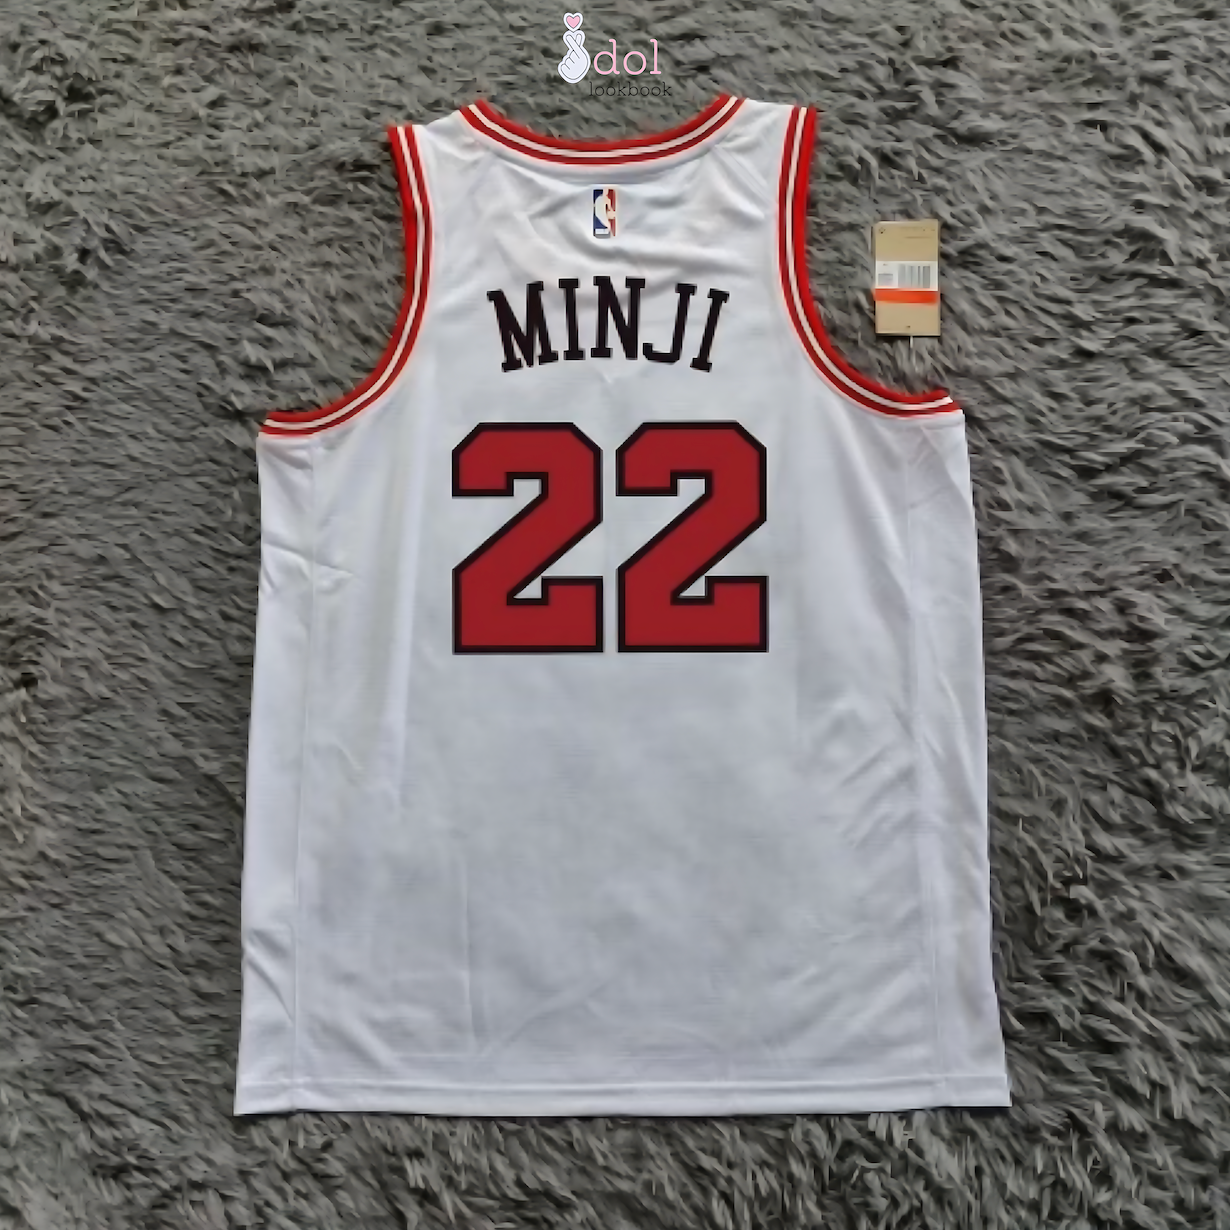 New Jeans Basketball Jersey // White and Red